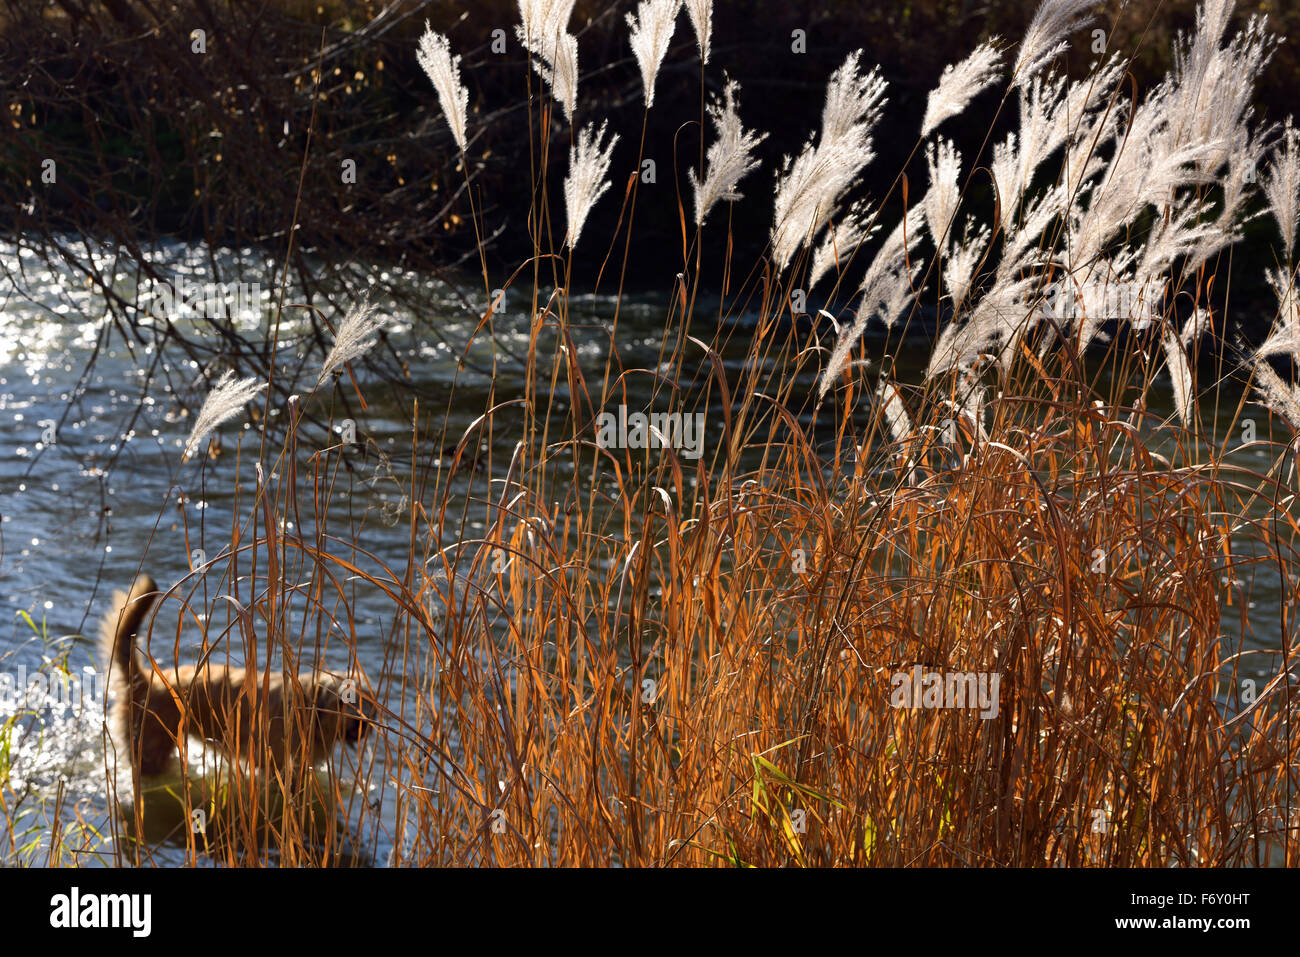 Pet dog splashing in the Humber river in a Toronto Park in Autumn with Pampas Grass Stock Photo